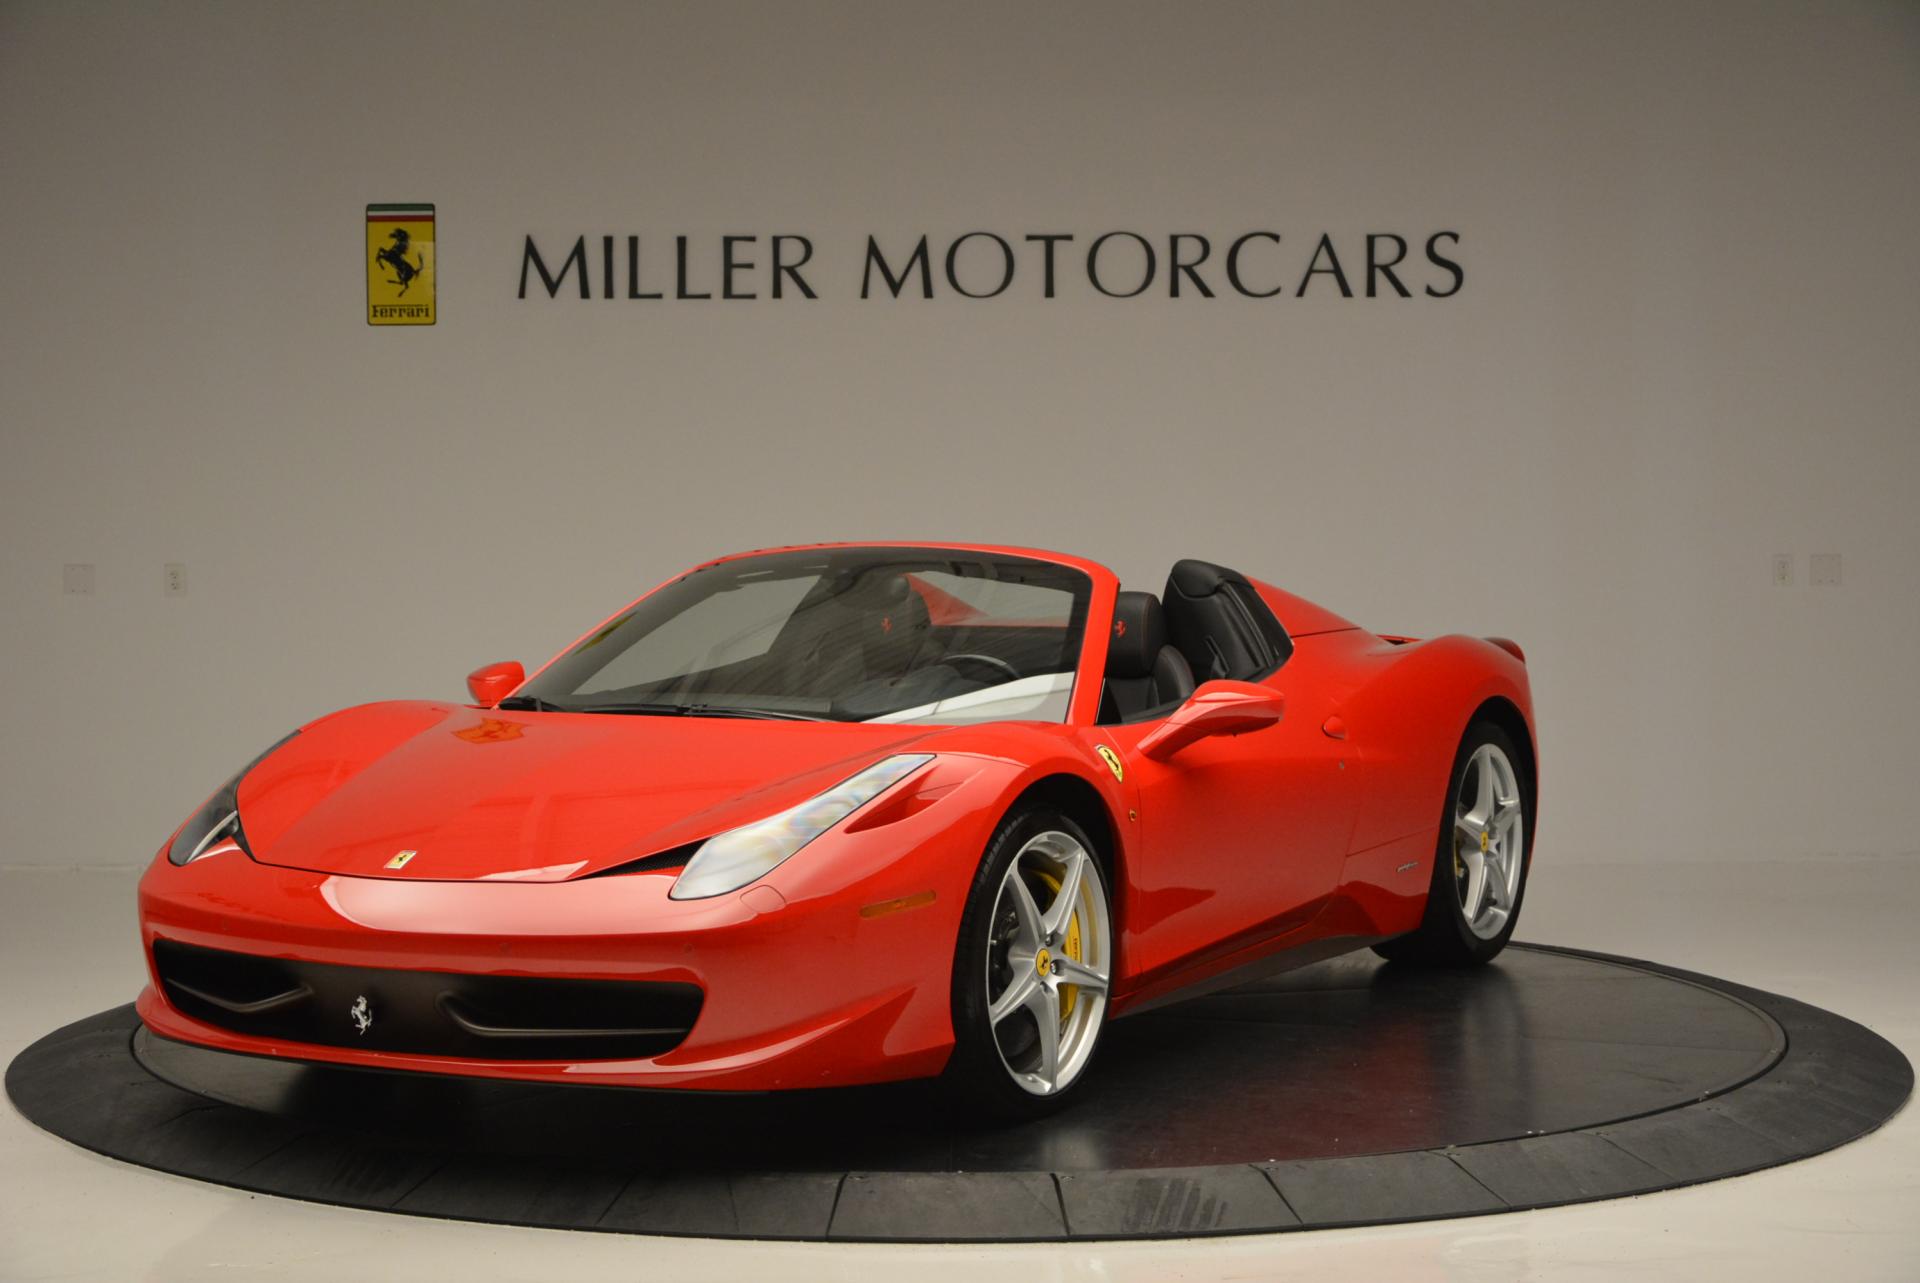 Used 2014 Ferrari 458 Spider for sale Sold at Bentley Greenwich in Greenwich CT 06830 1